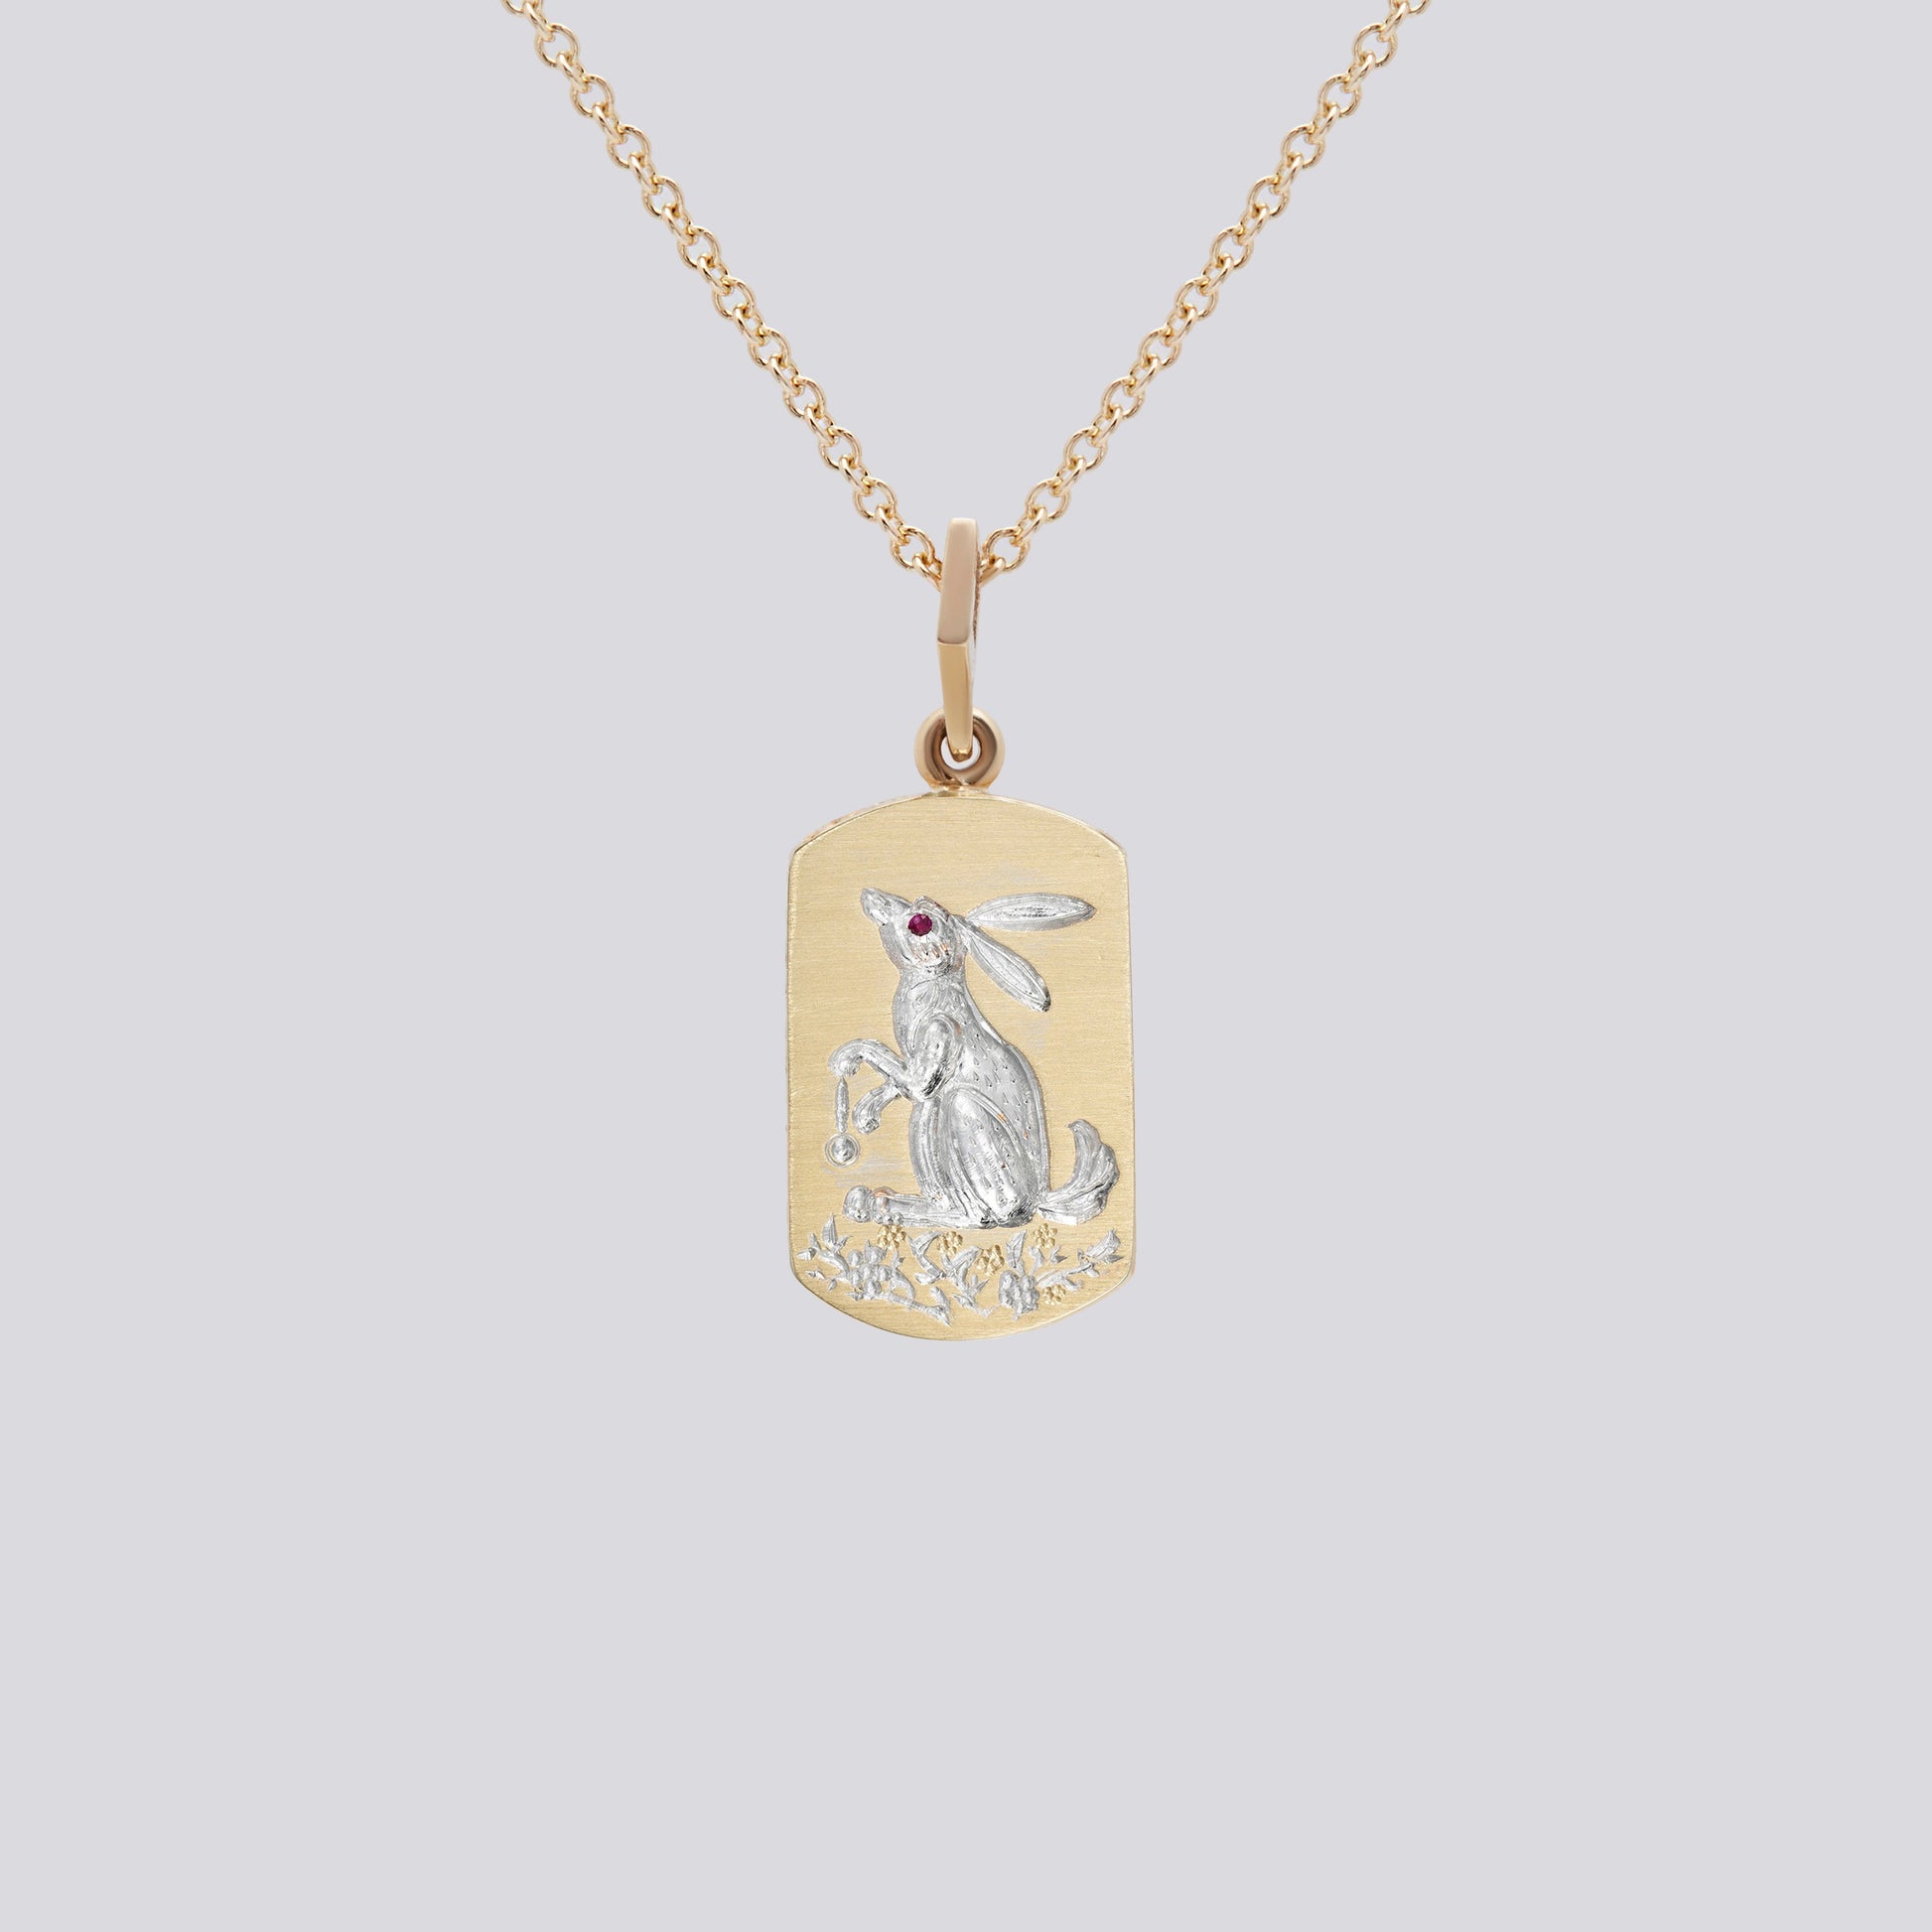 Castro Smith Jewelry Gold Rabbit Pendant Necklace with White Engravings.